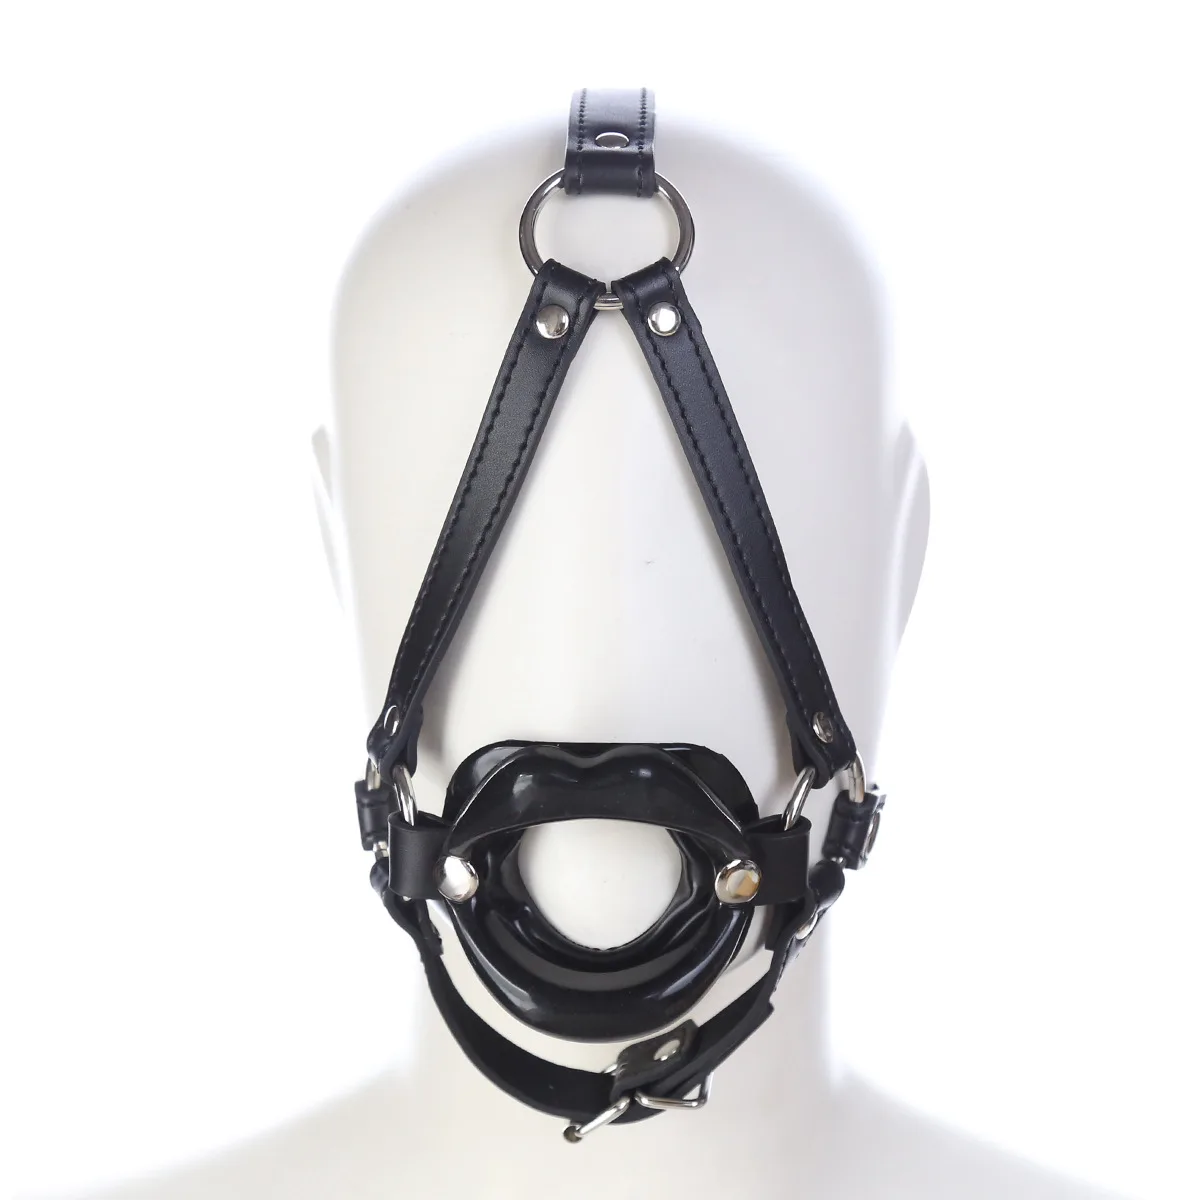 BDSM Bondage Sex Toy Open Mouth Head Mouth Gag For SM Game